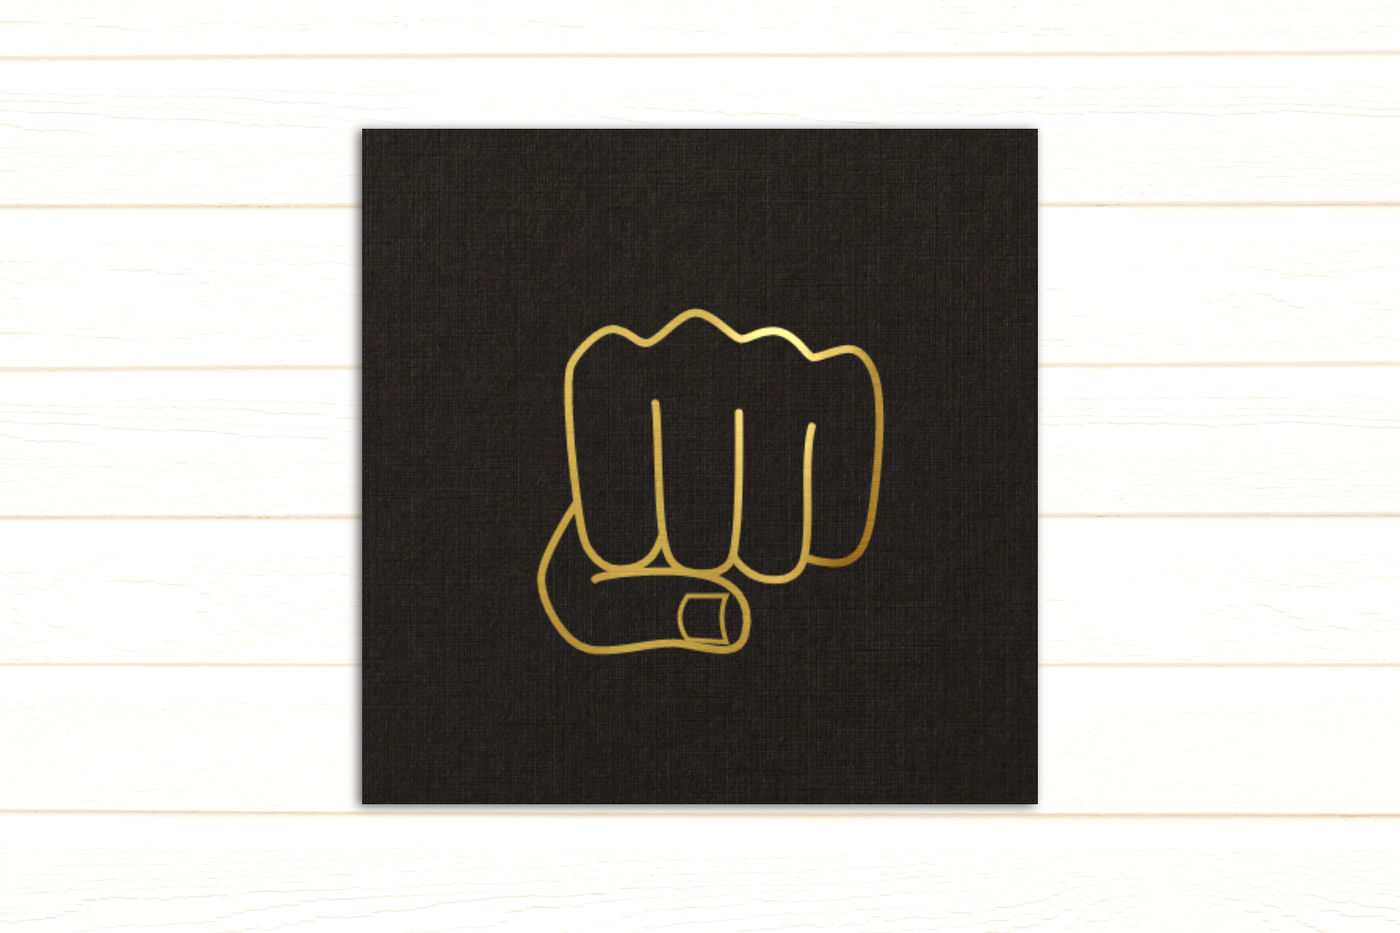 Line drawing of a pair of fists done in gold foil.